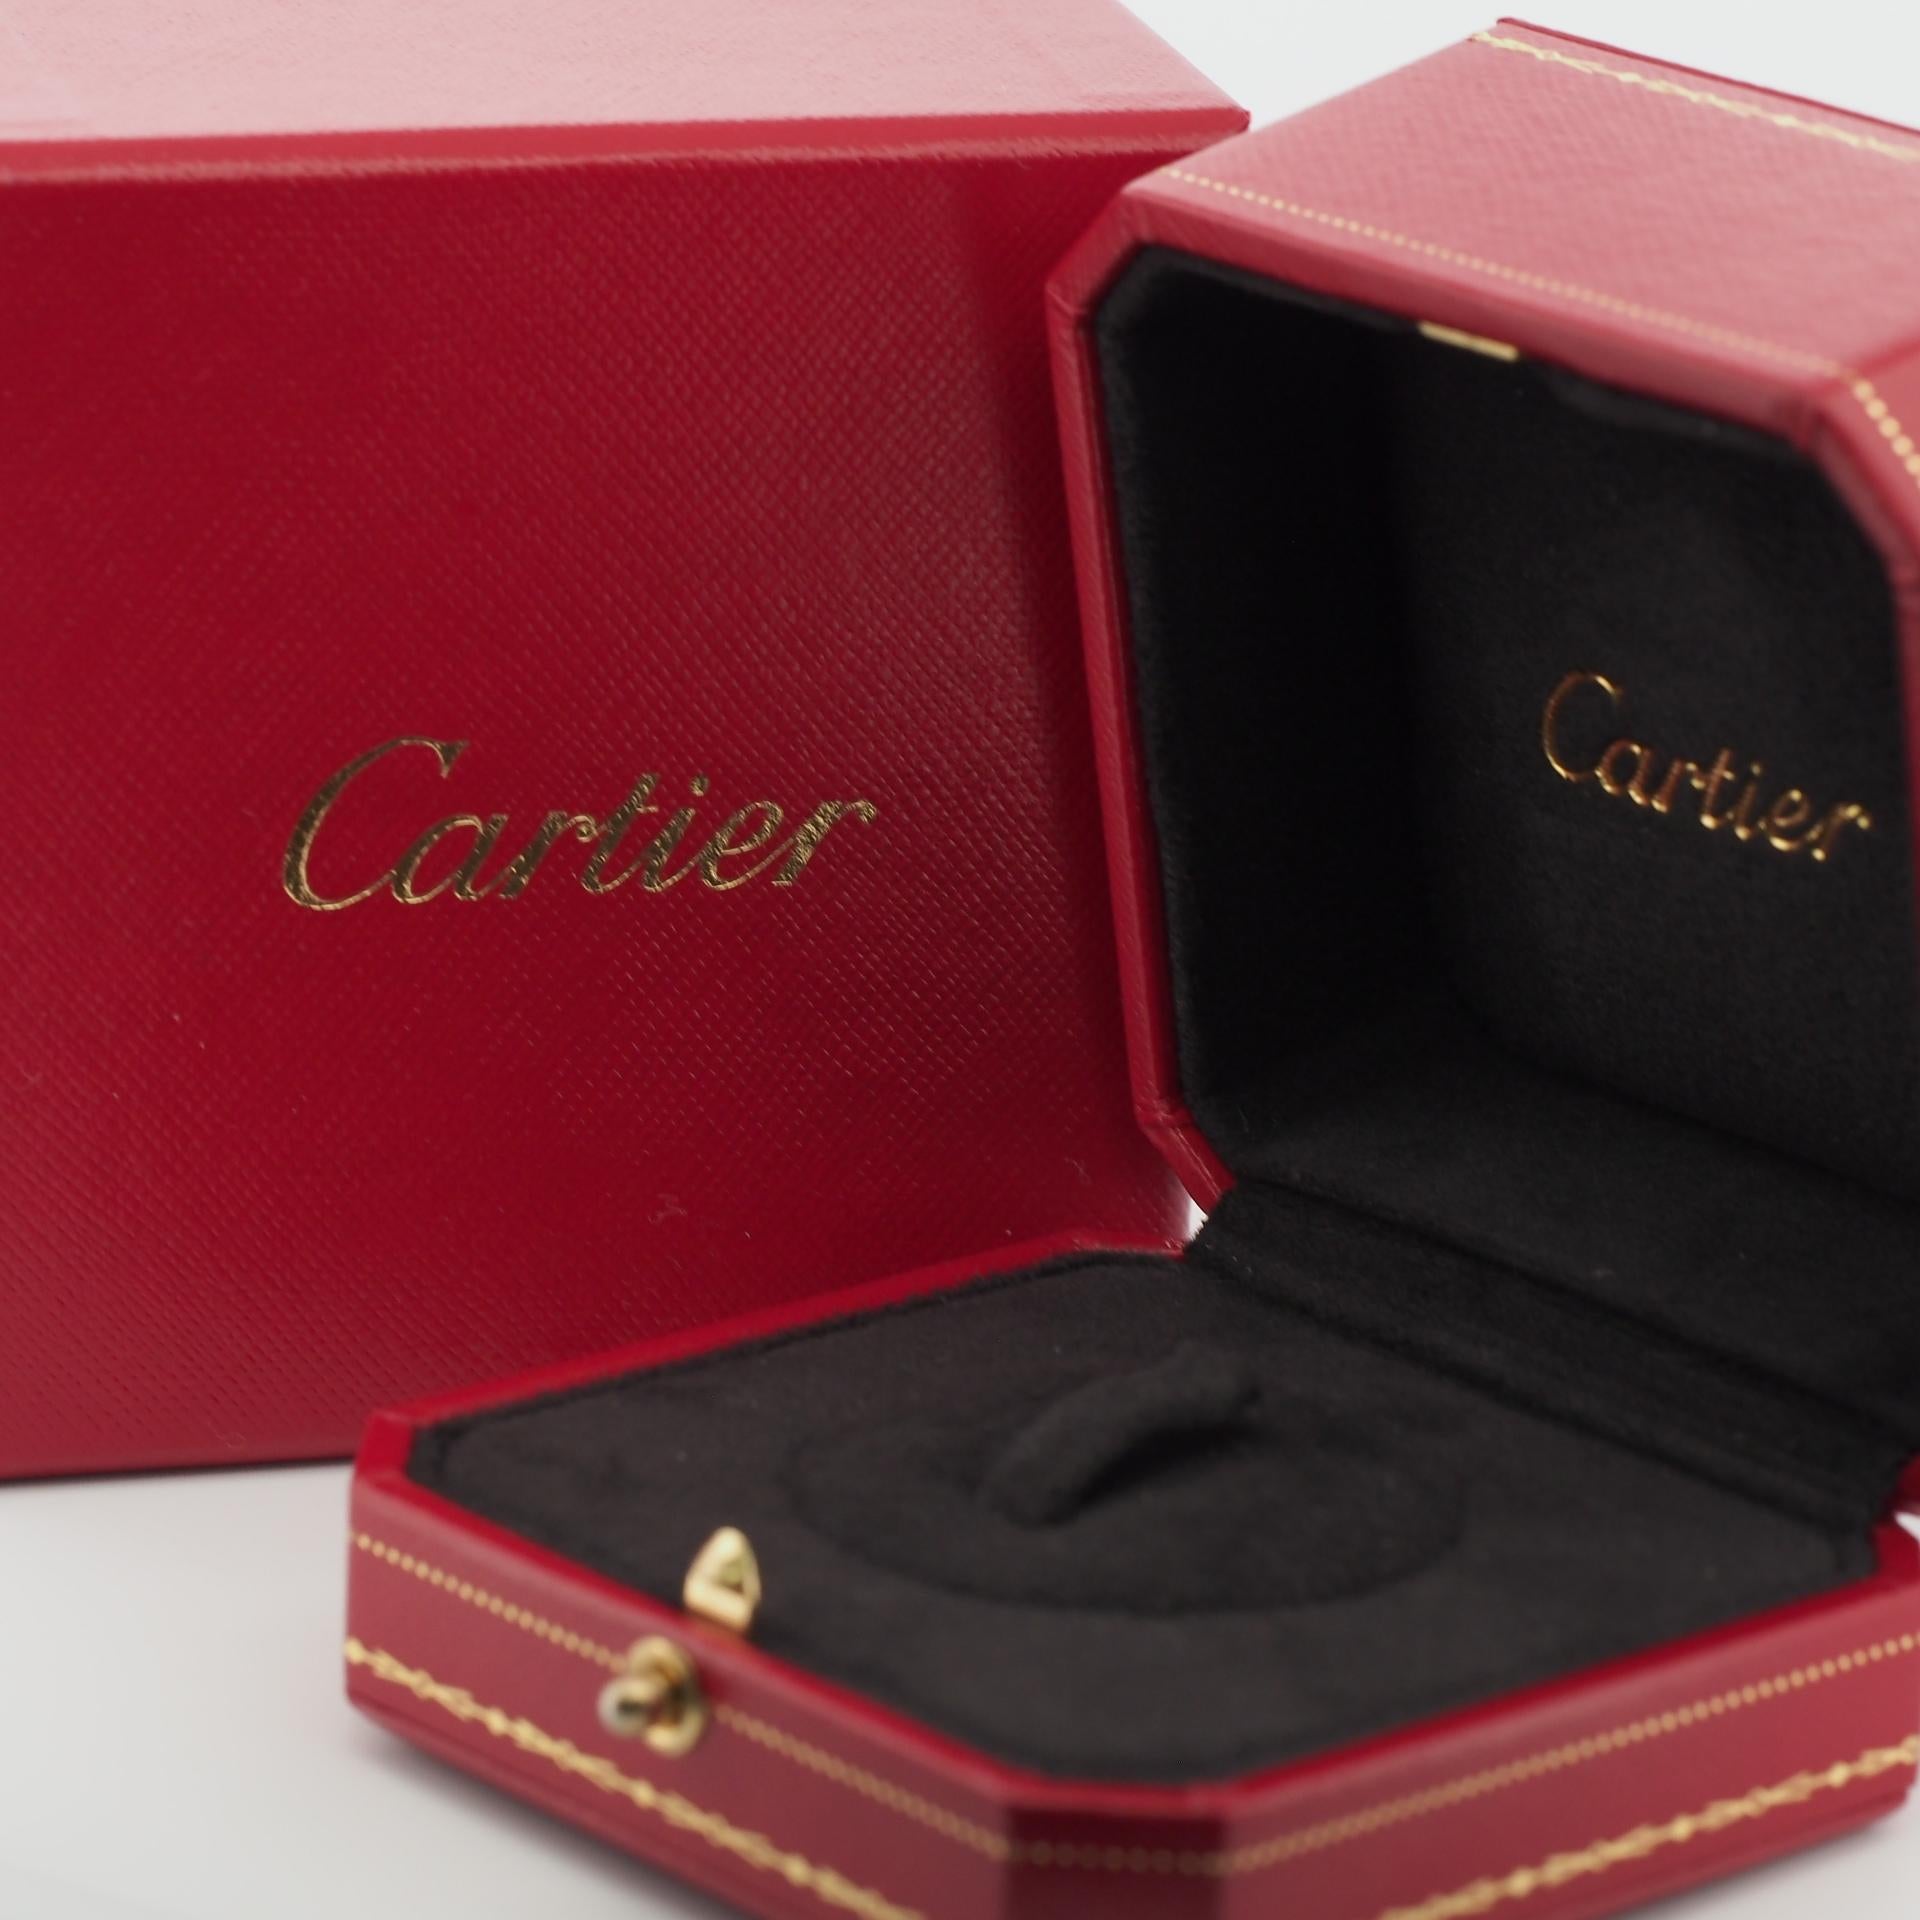 Cartier Astro Love Ring White Gold 52 US 6.0 1999 Limited Edition 2